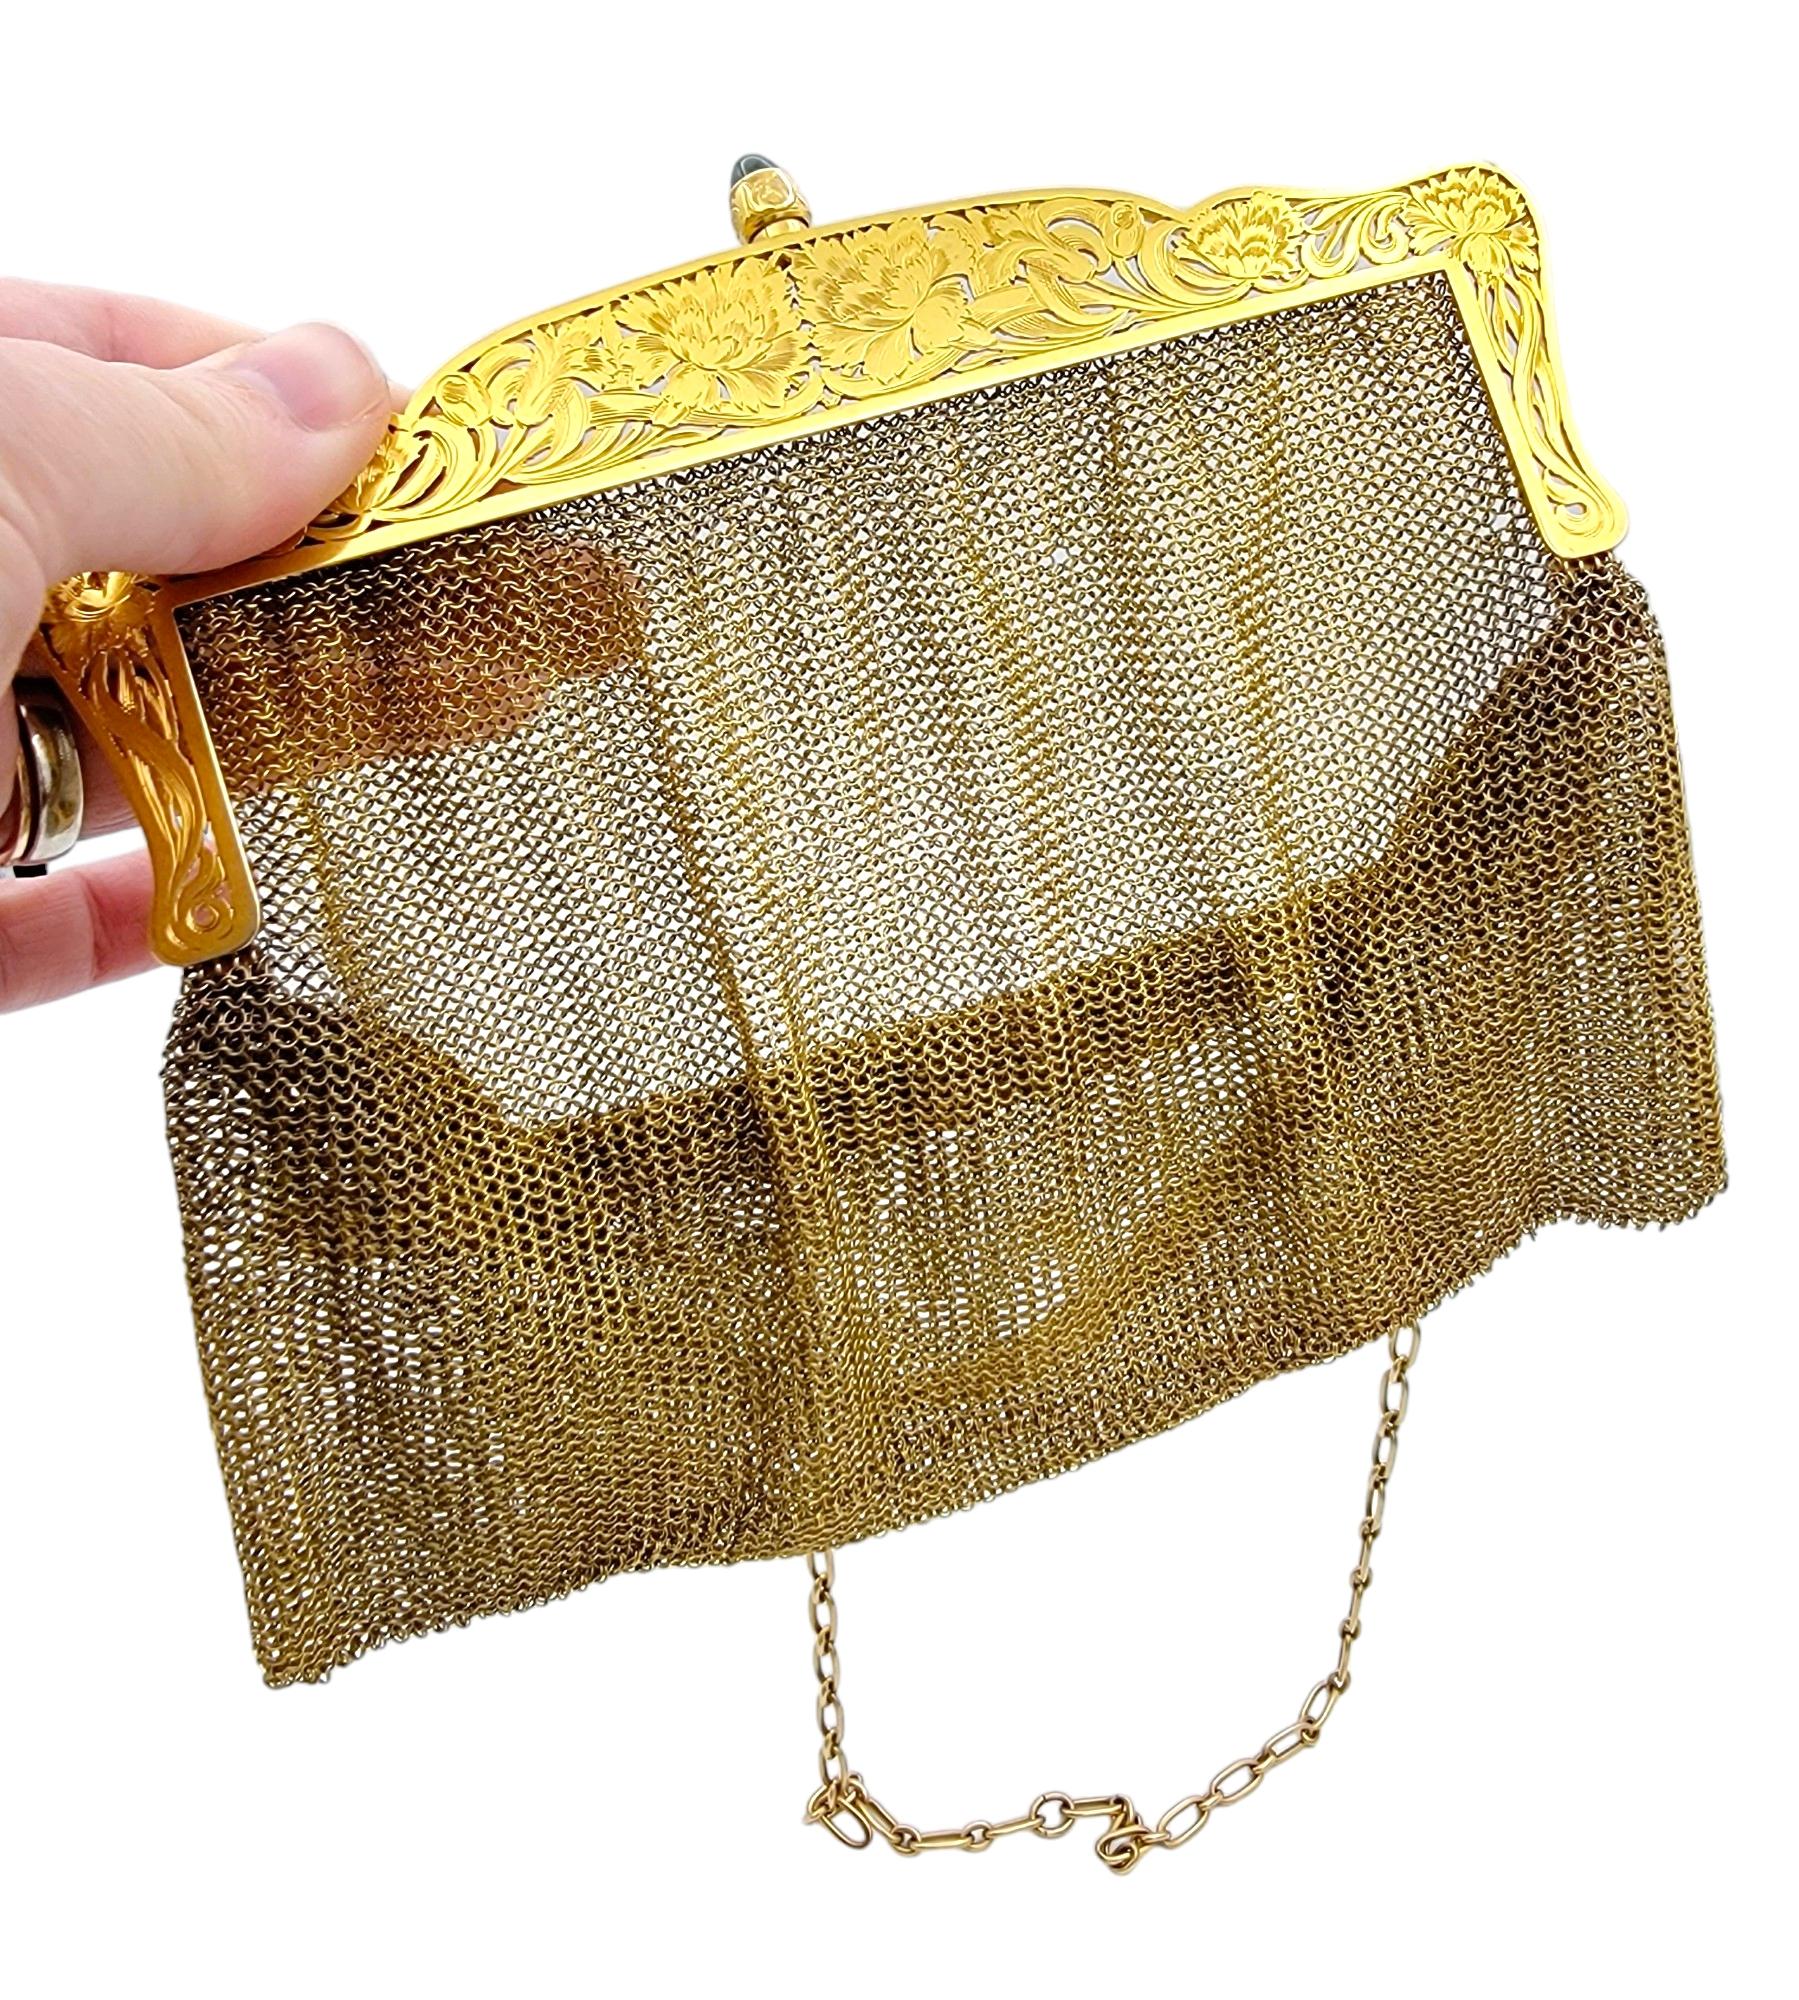 Vintage Art Deco 14 Karat Gold Mesh Purse with Chain and Sapphire Cabochon Clasp In Good Condition For Sale In Scottsdale, AZ